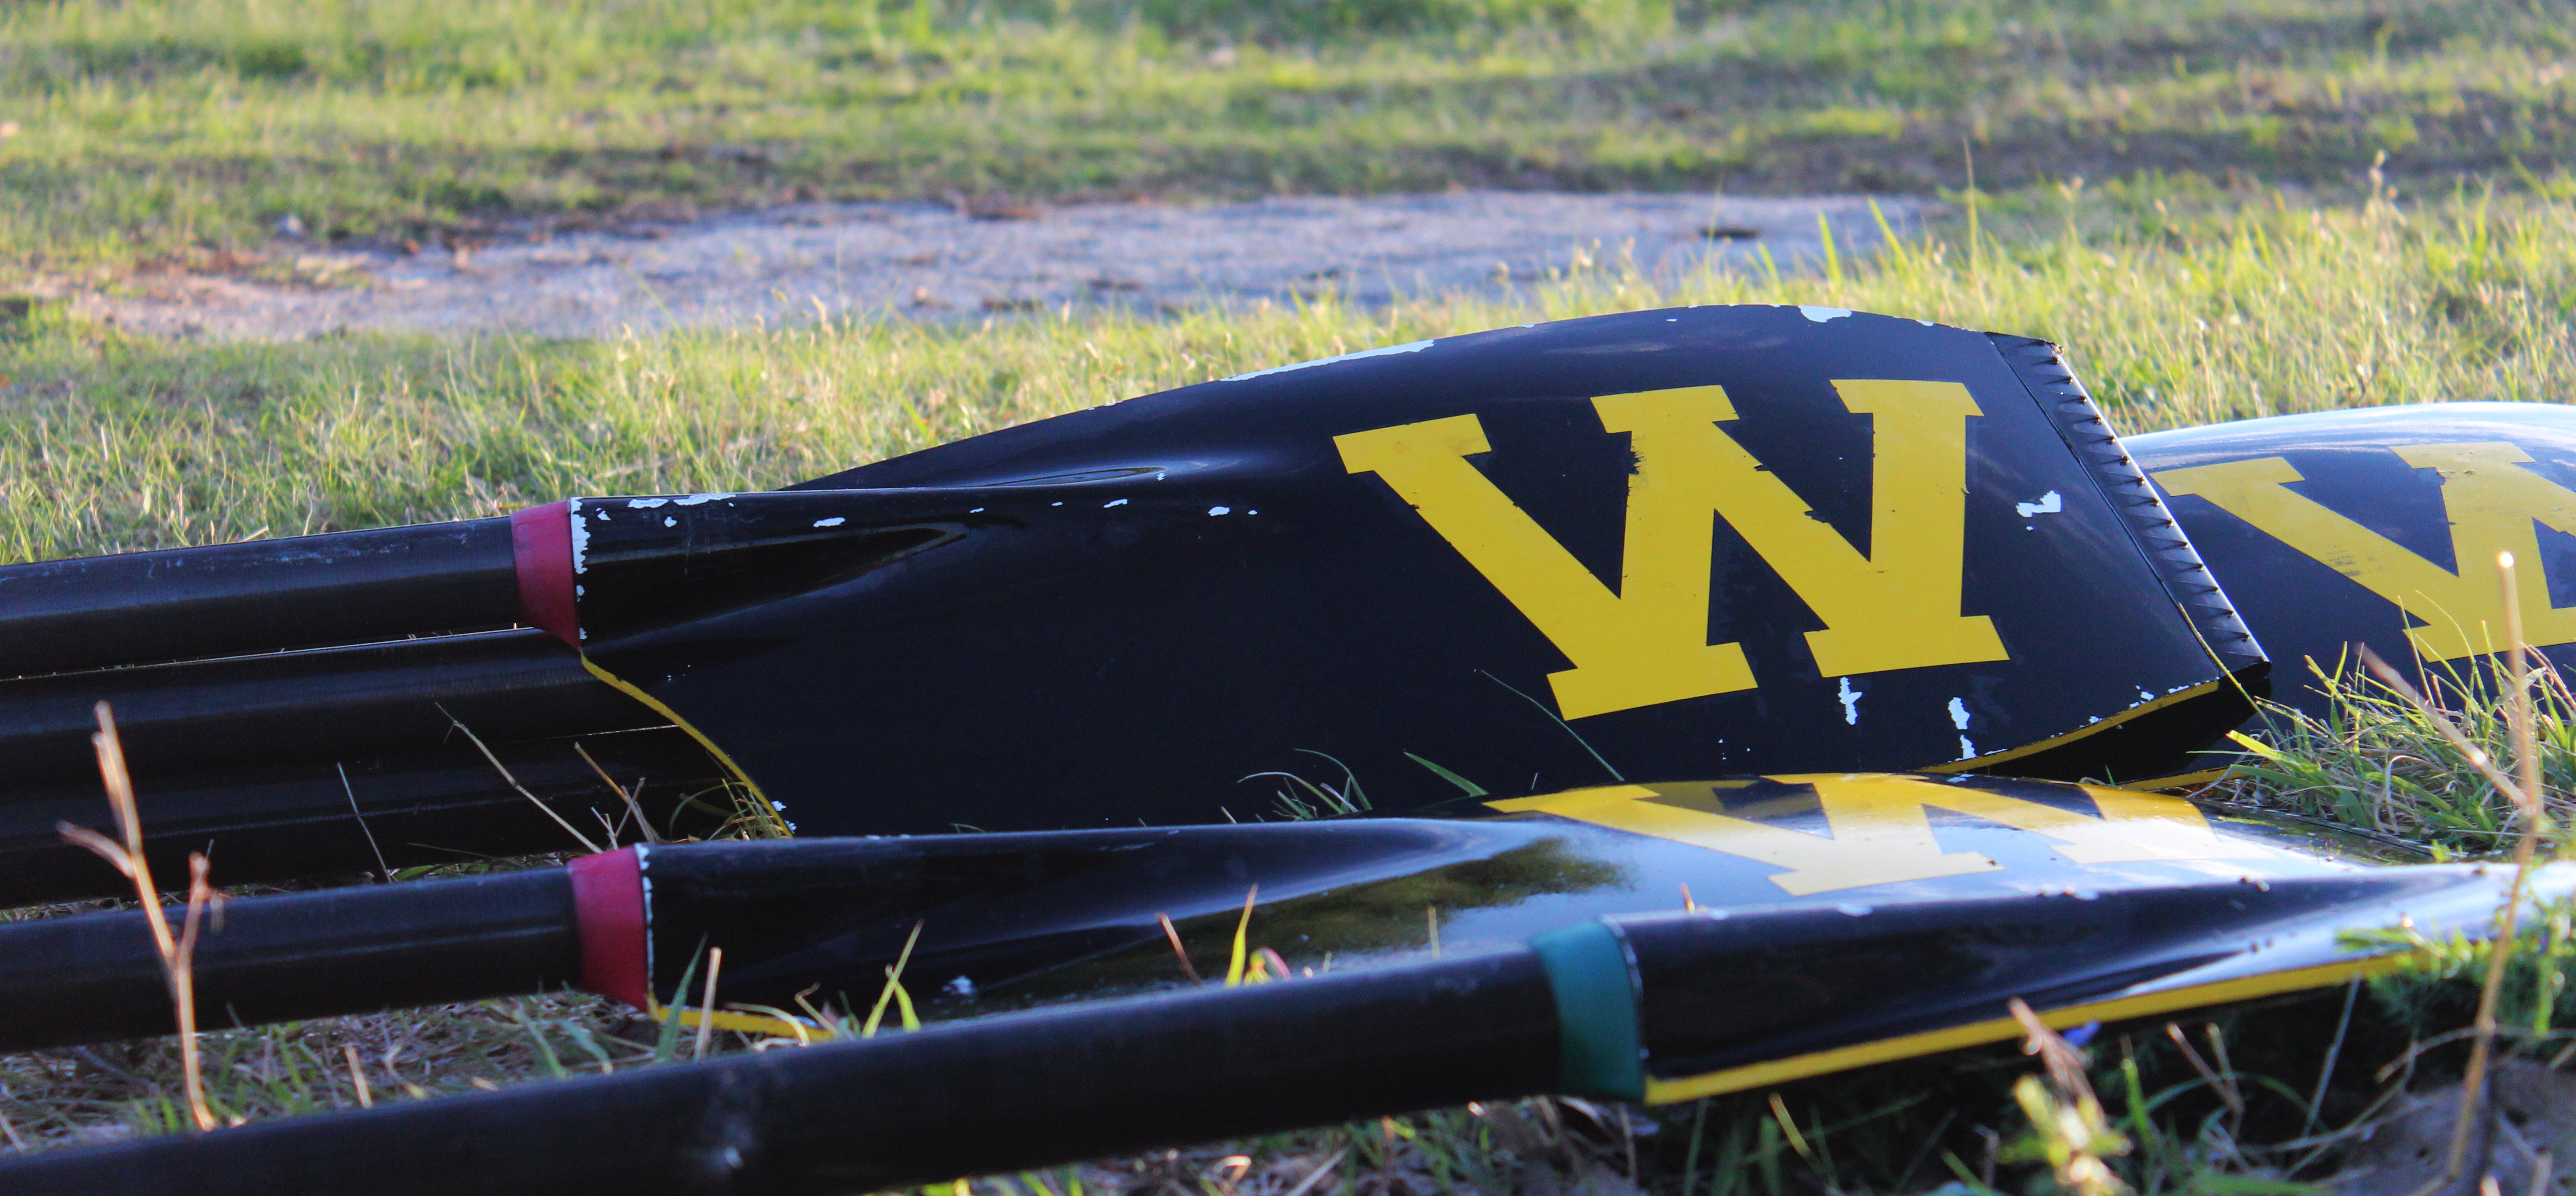 Wichita State rowing oars laying in the grass